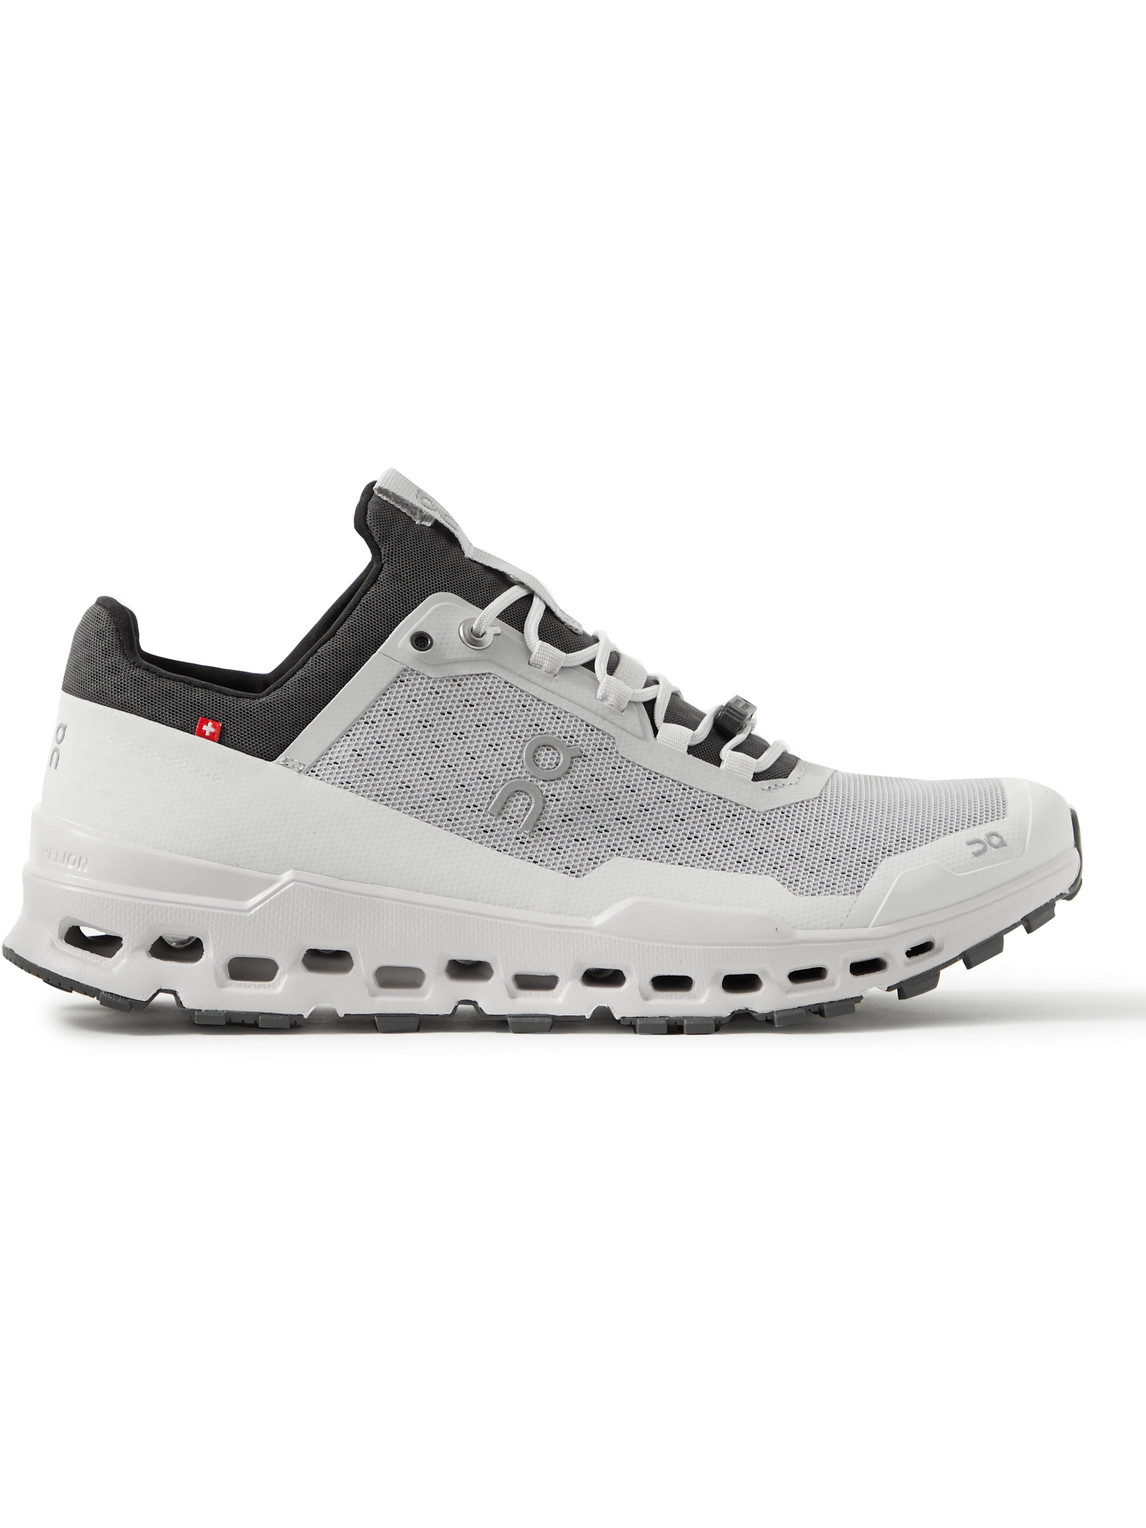 ON CLOUDULTRA RUBBER-TRIMMED MESH TRAIL RUNNING SNEAKERS